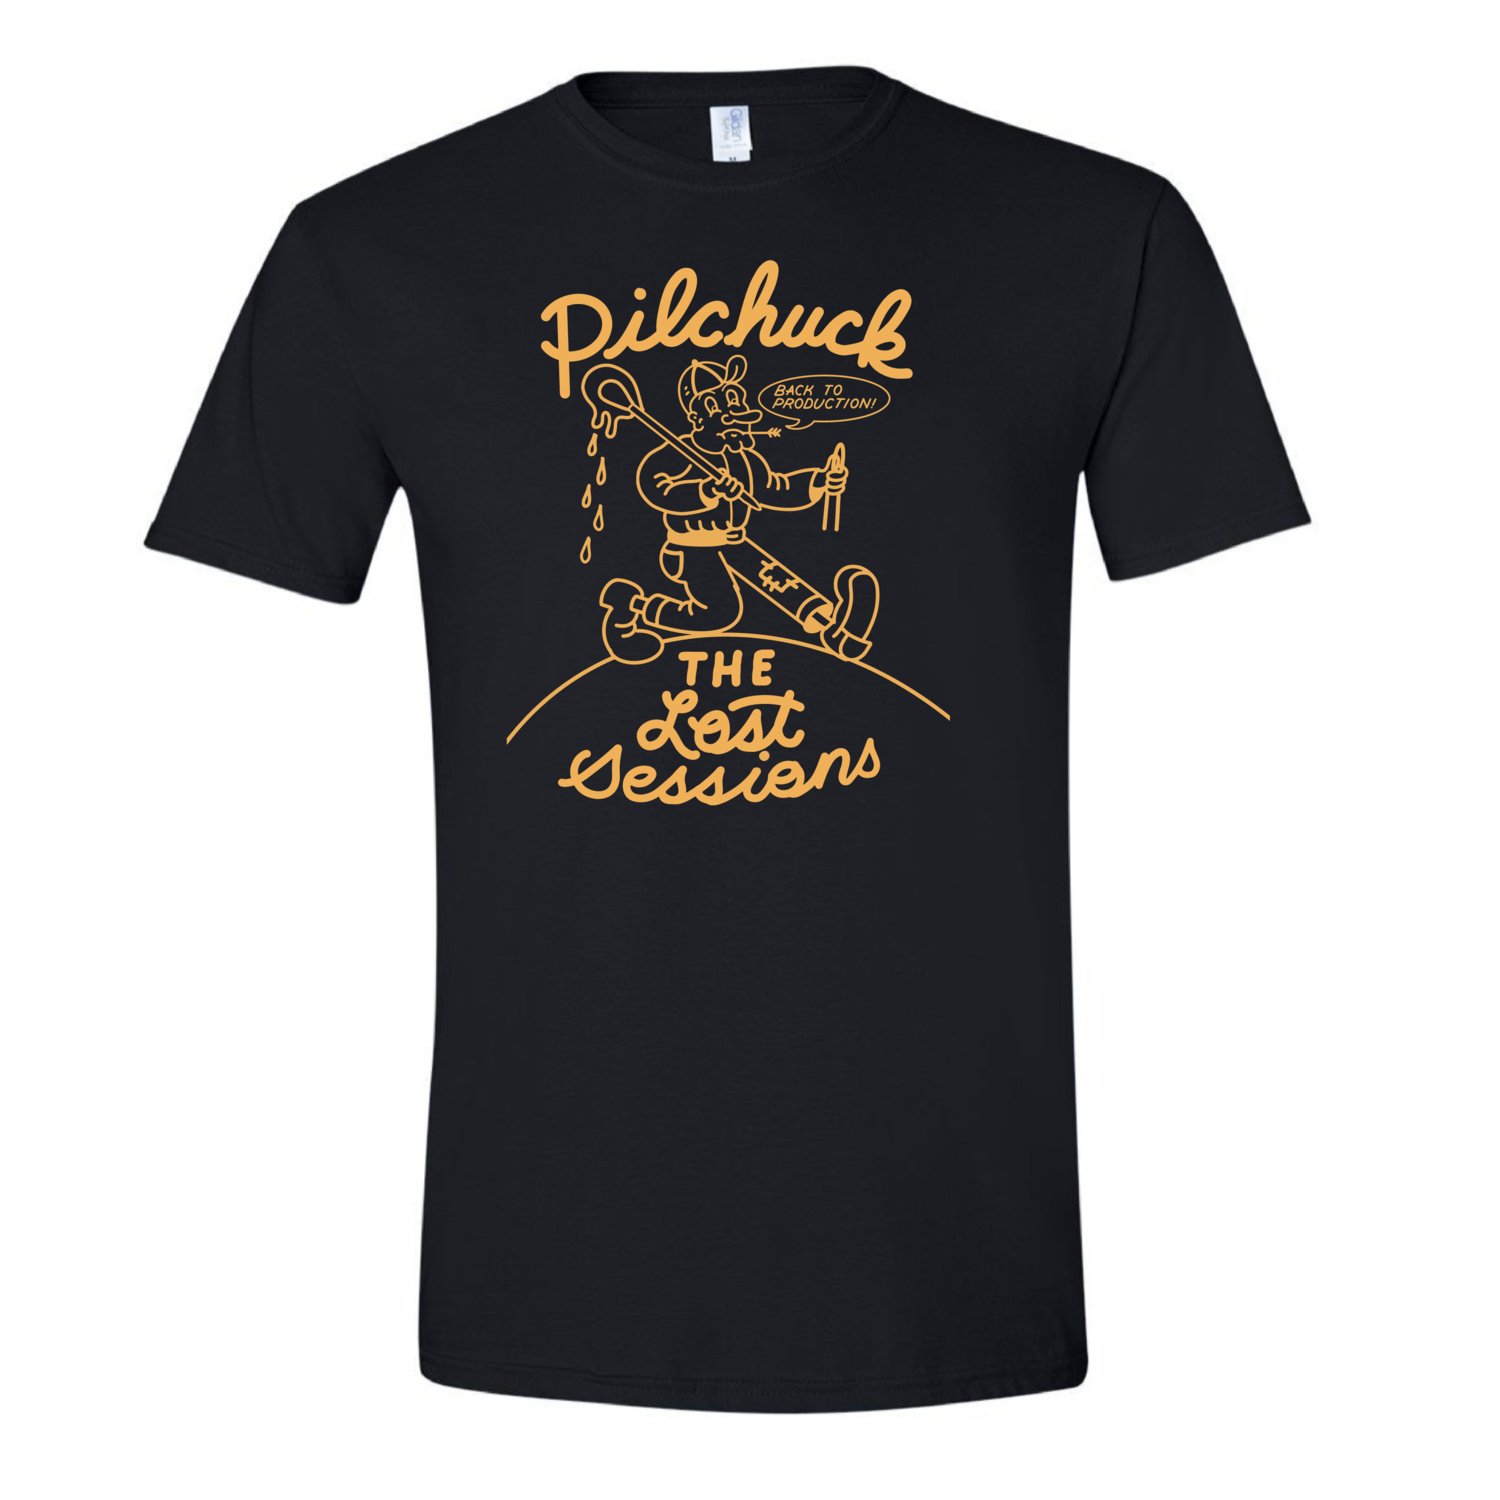 Pilchuck's Lost Sessions T-Shirt